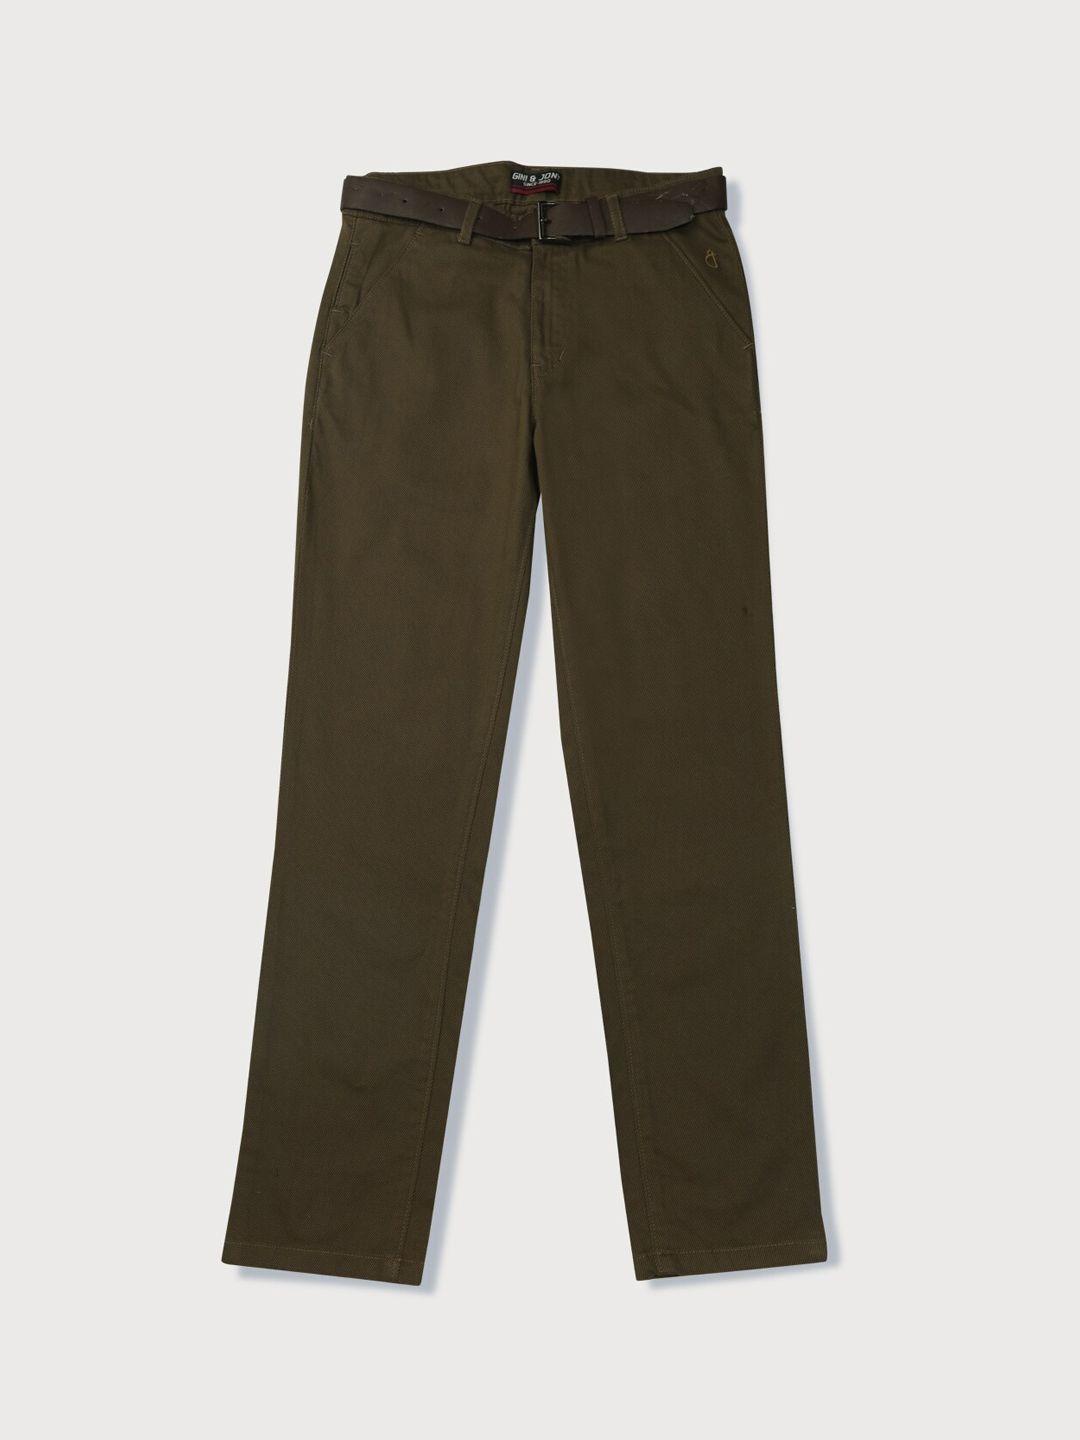 gini and jony boys olive green mid-rise trouser